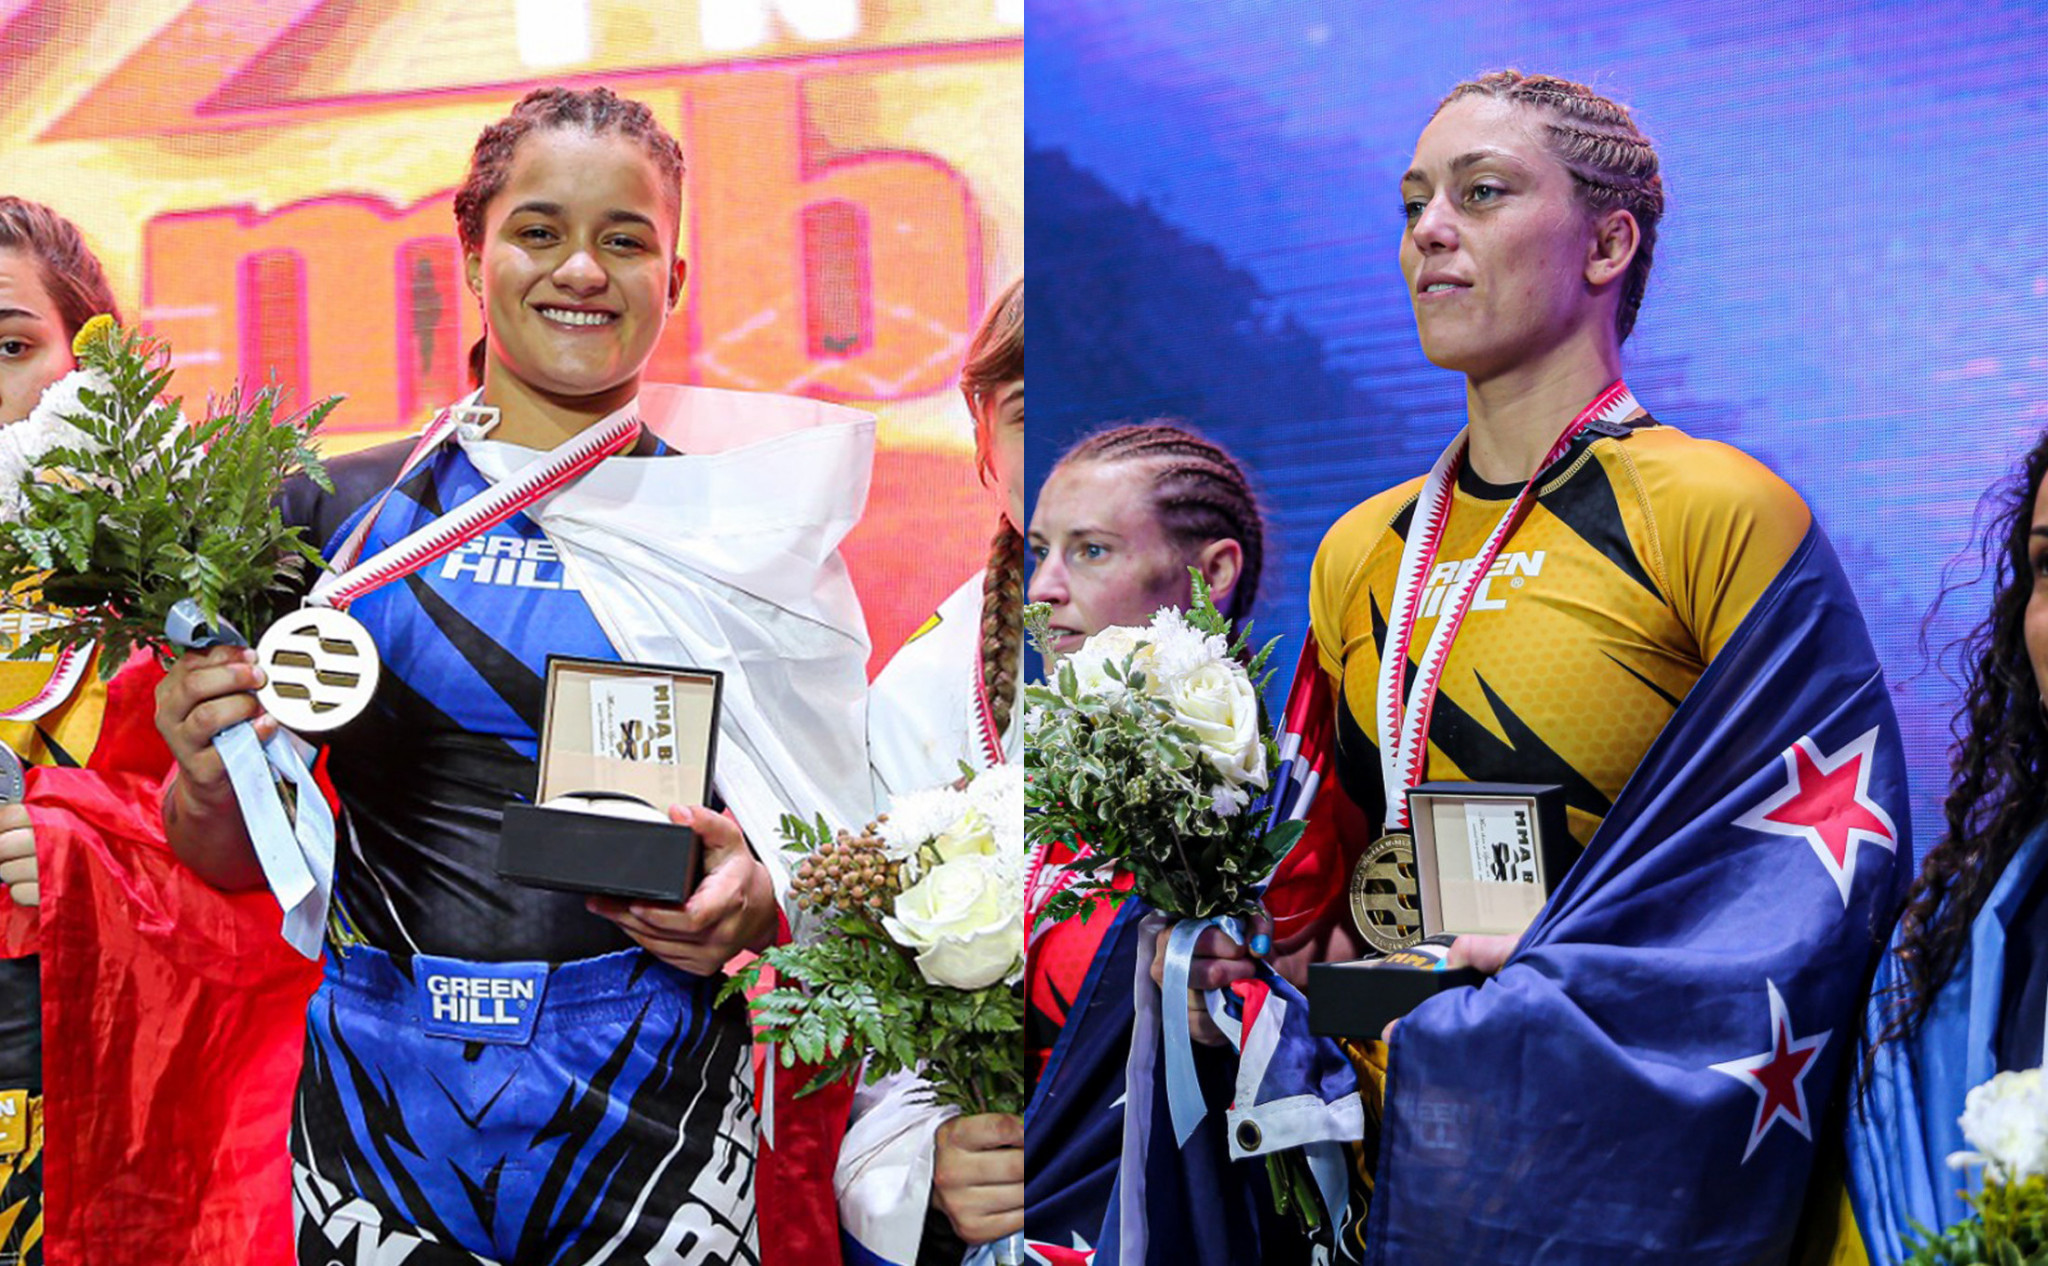 World champions from 2019 Sabrina Laurentina De Sousa, left, and Michelle Montague, right, could meet in the women's featherweight semi-finals ©IMMAF